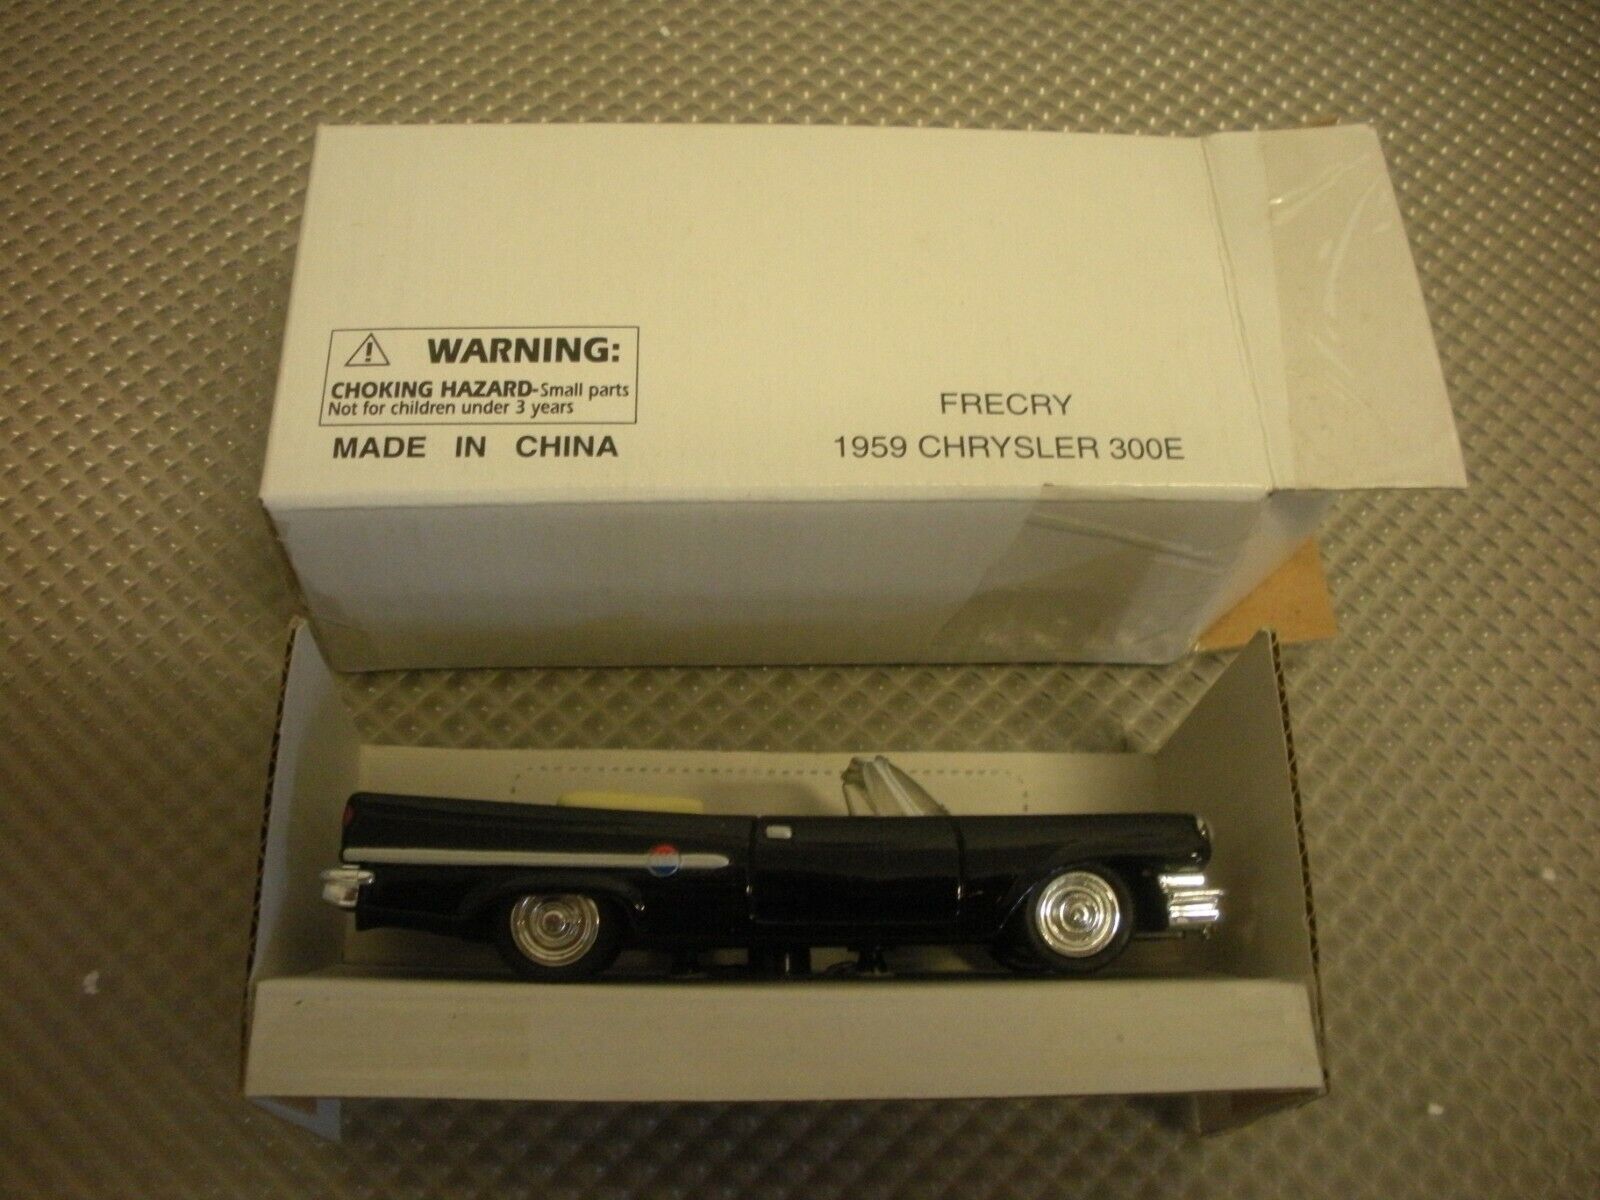 New Ray #FRECRY Die-Cast 1959 Chrysler 300E Convertible. Measures 4.5” long. New